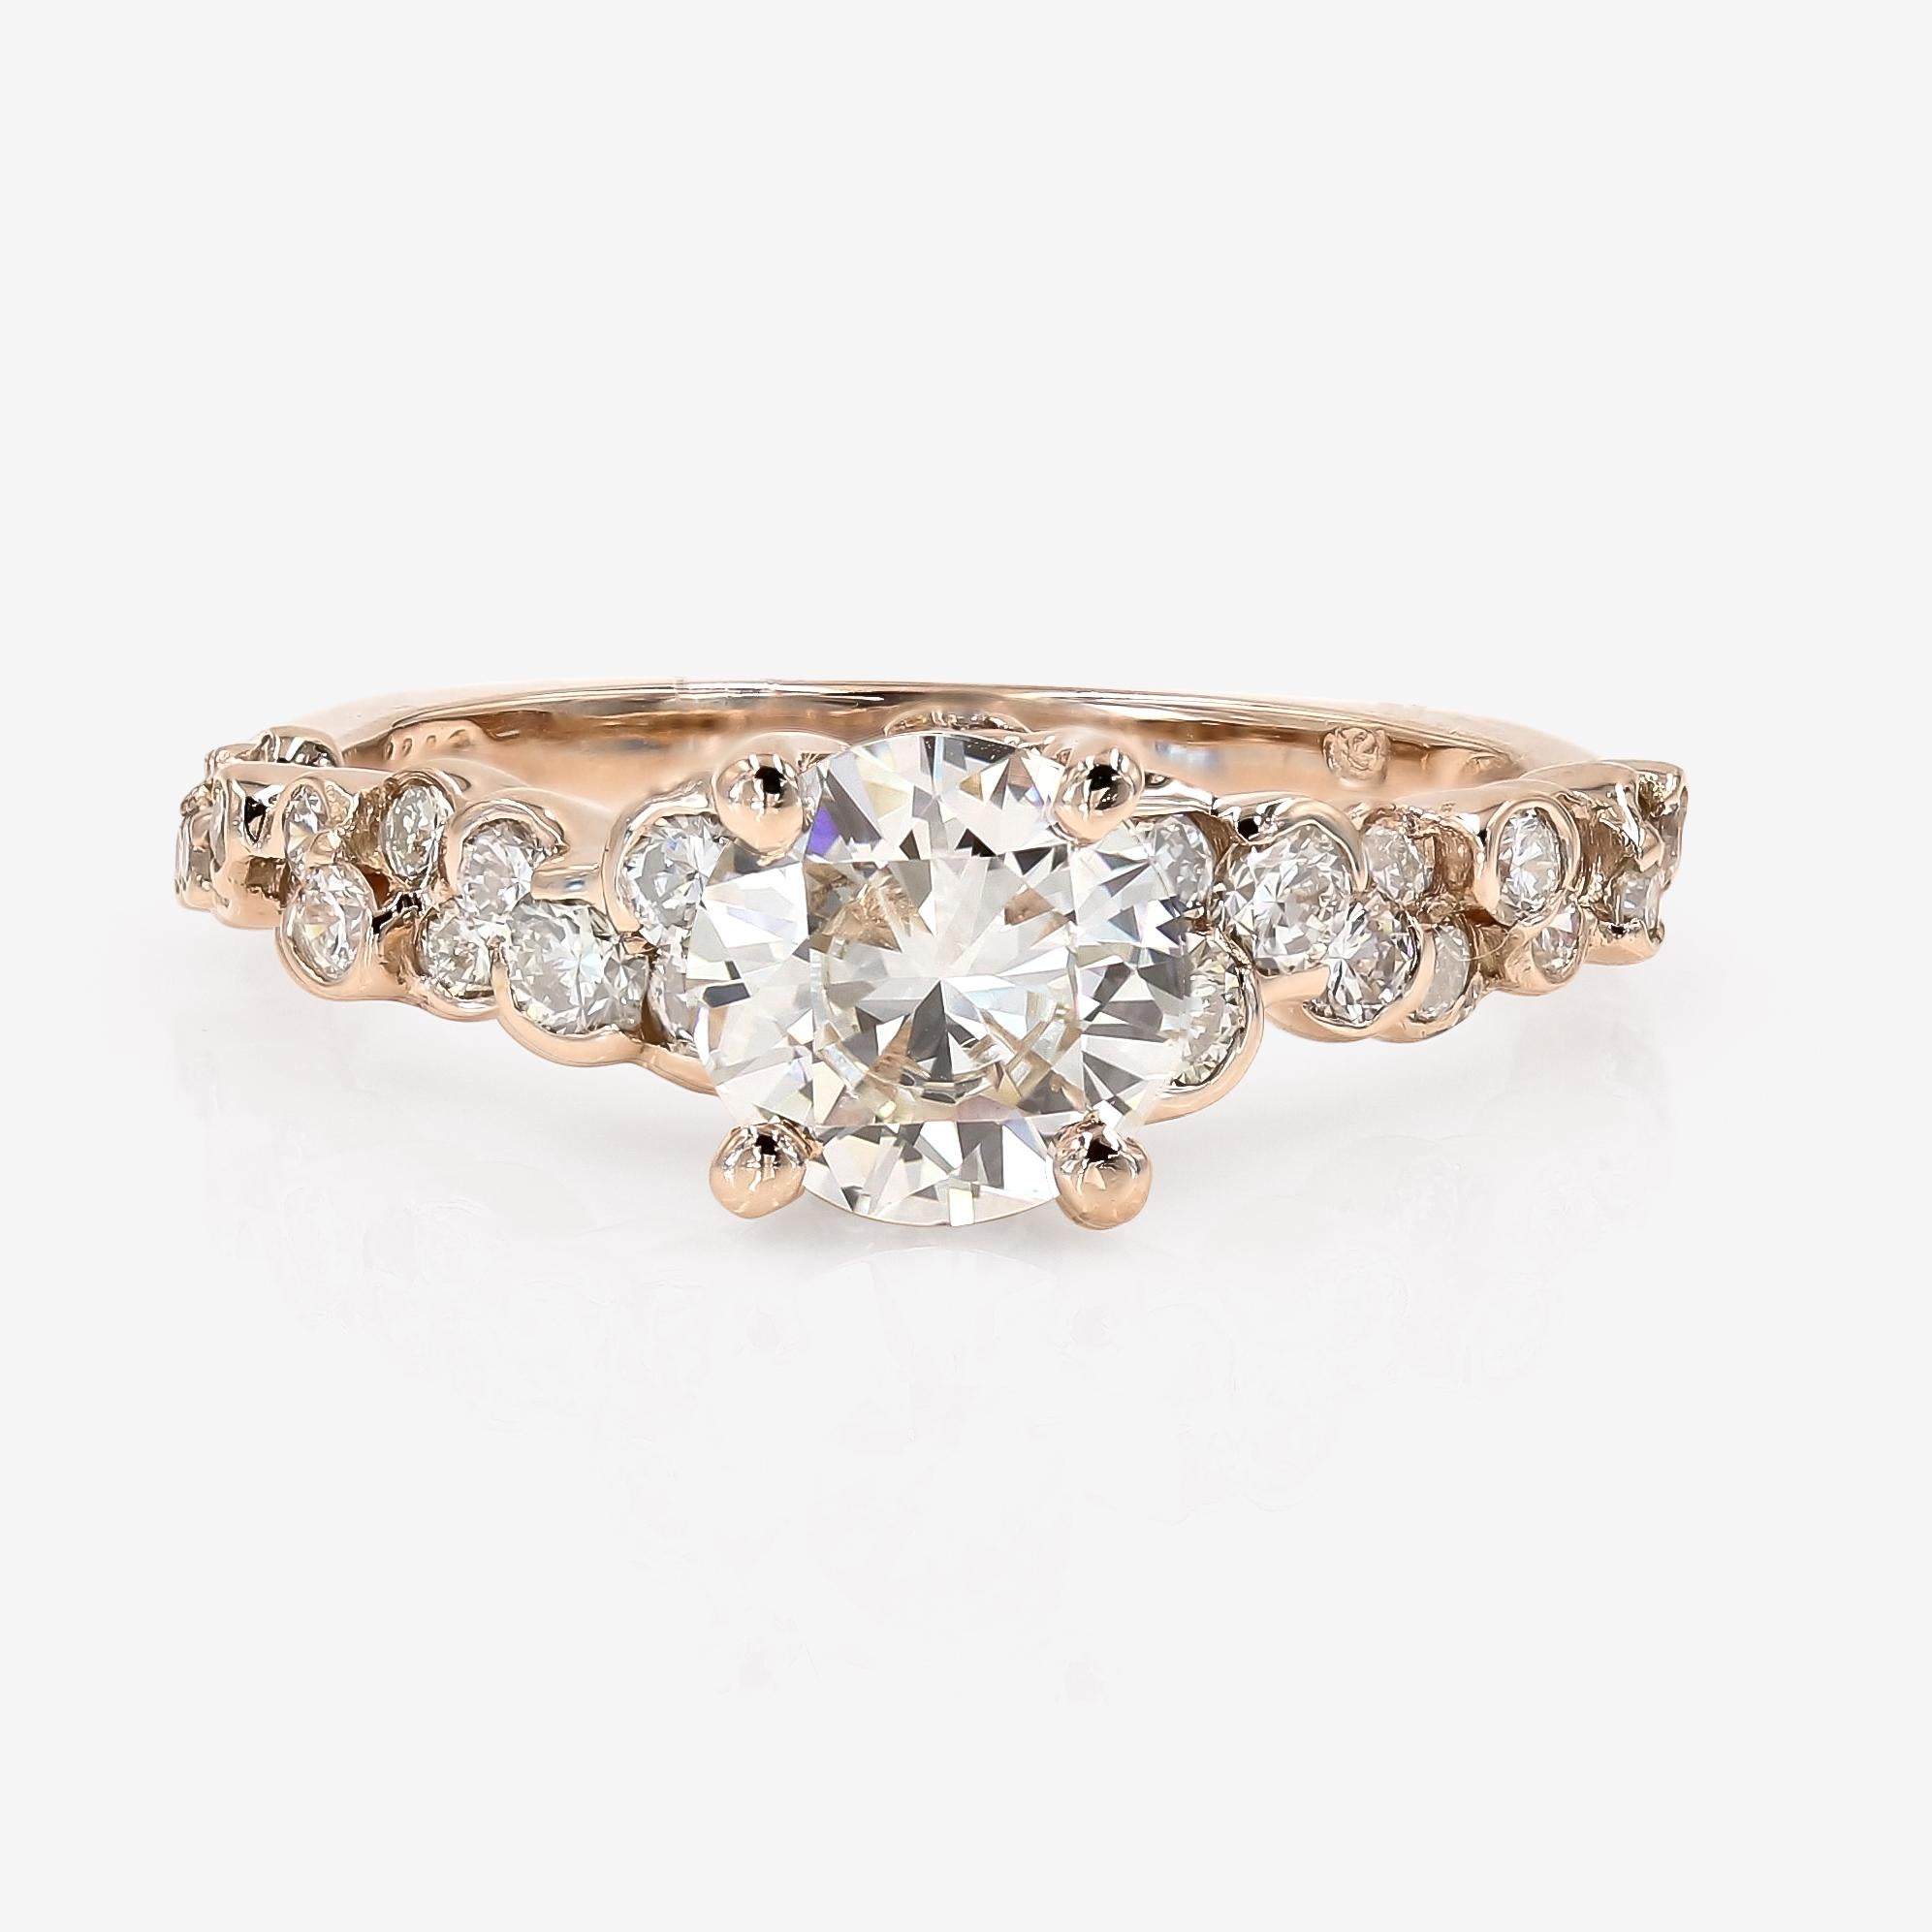 This Lester Lampert original CumuLLus® setting in 14kt. rose gold features a 1.08cts. round cut center that is J in color and VS2 in clarity. Down the sides of the shank are 36 ideal cut round diamonds=.73ct. t.w. The round diamonds are H-I in color